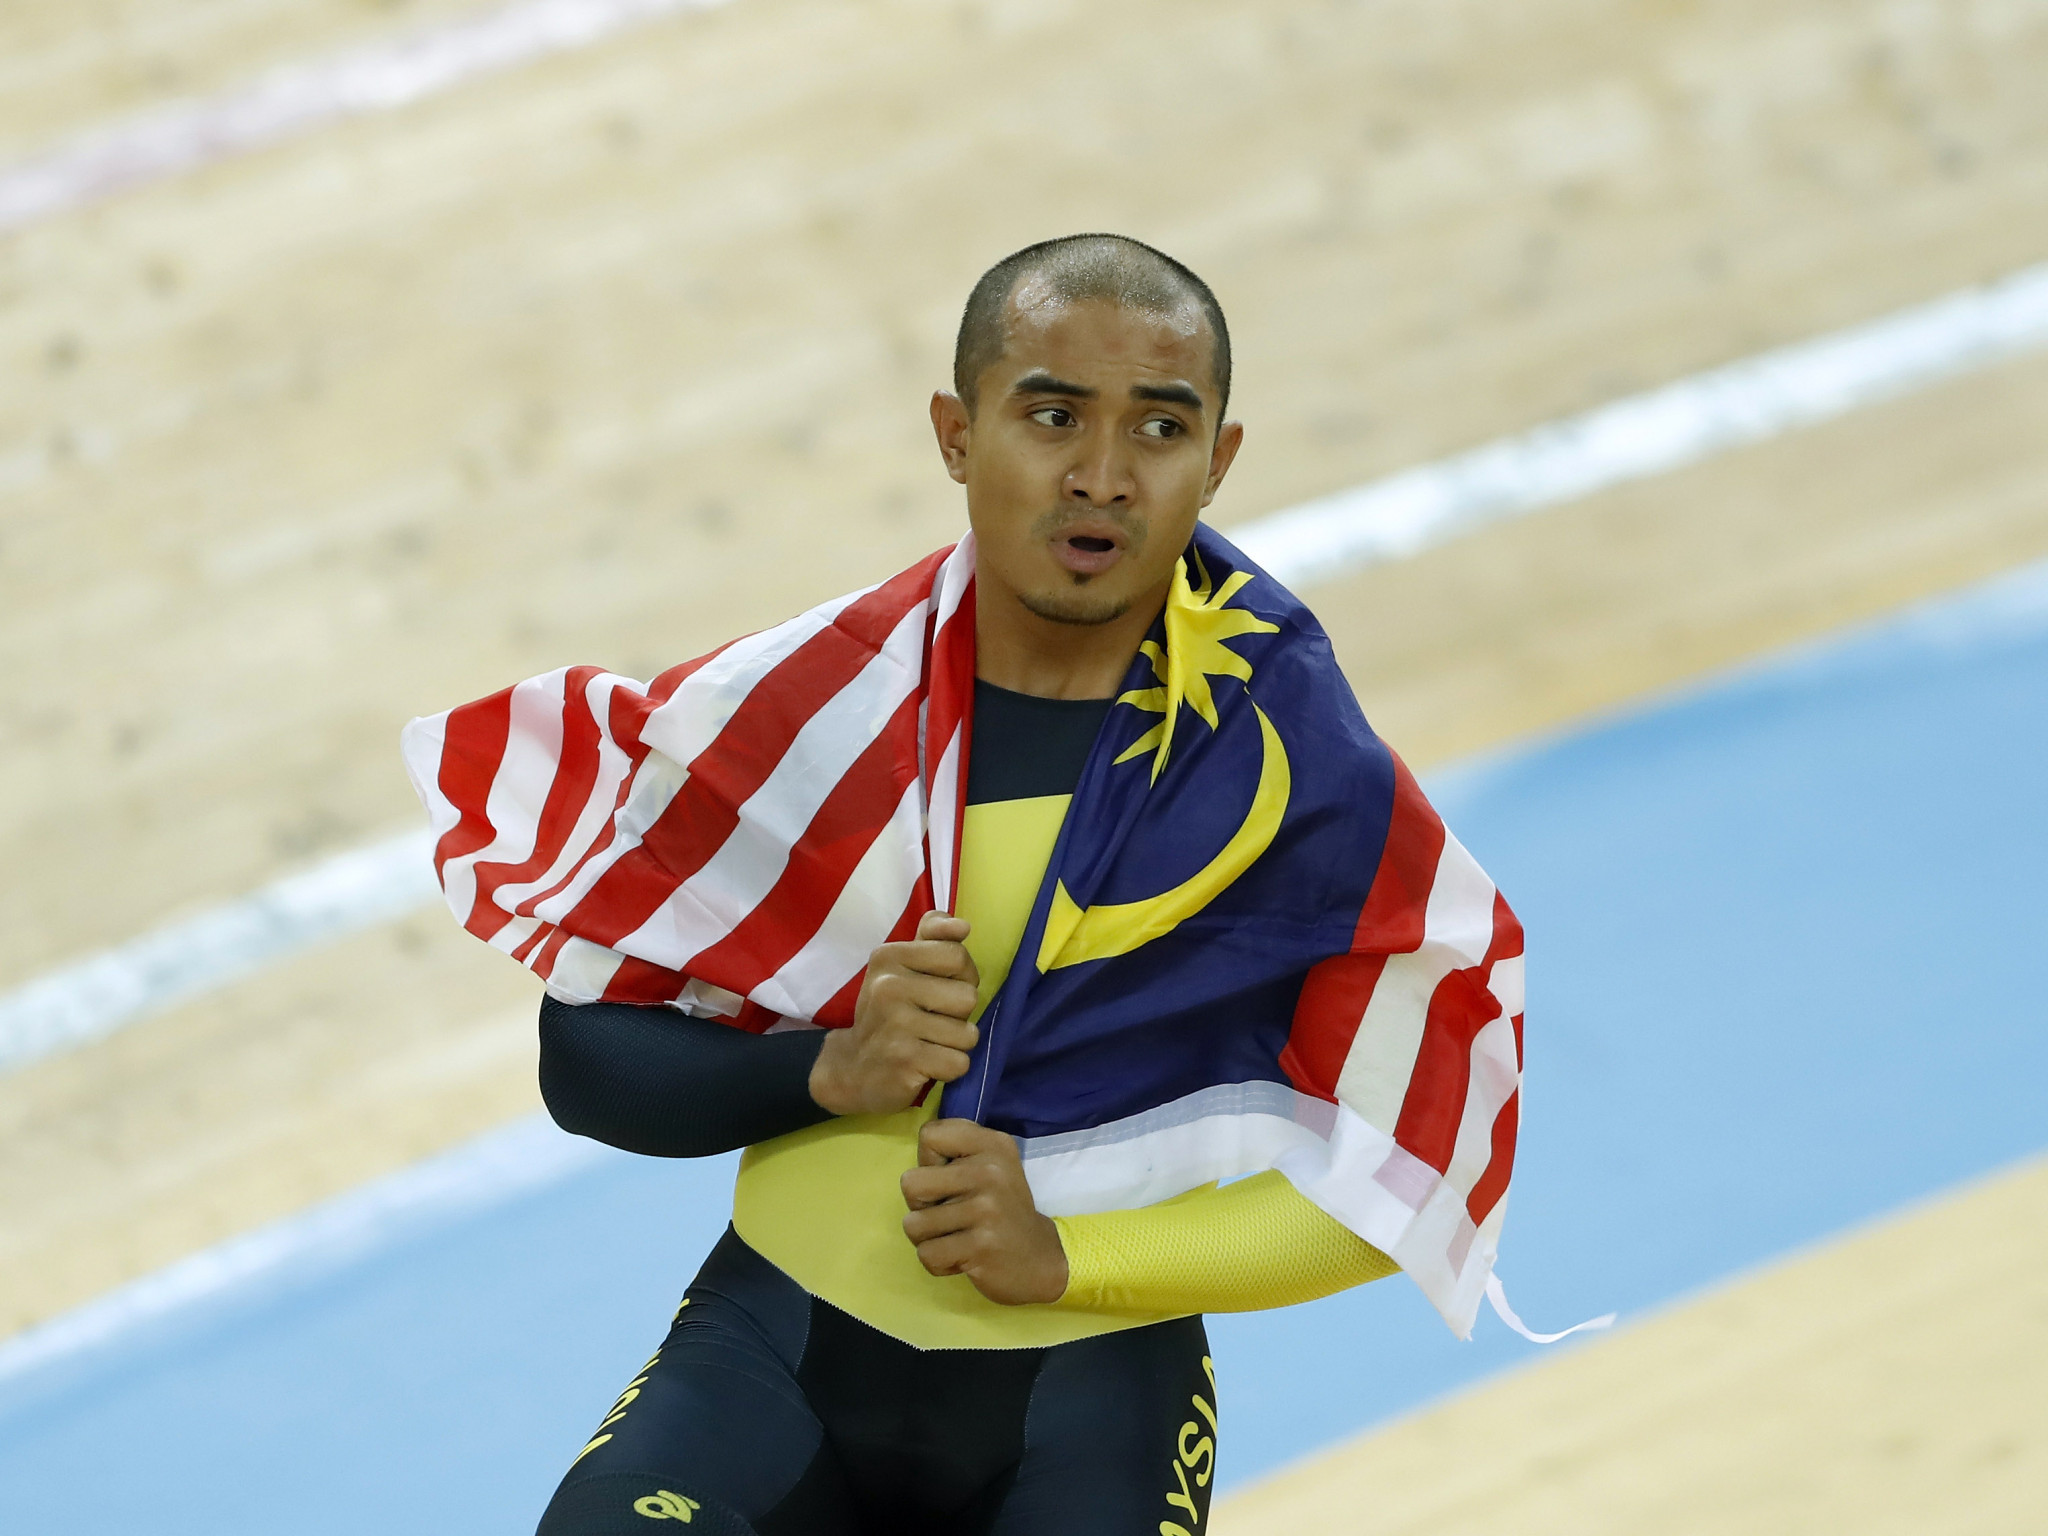 Mohd Azizulhasni Awang set a new Asian record in the National Velodrome ©Getty Images